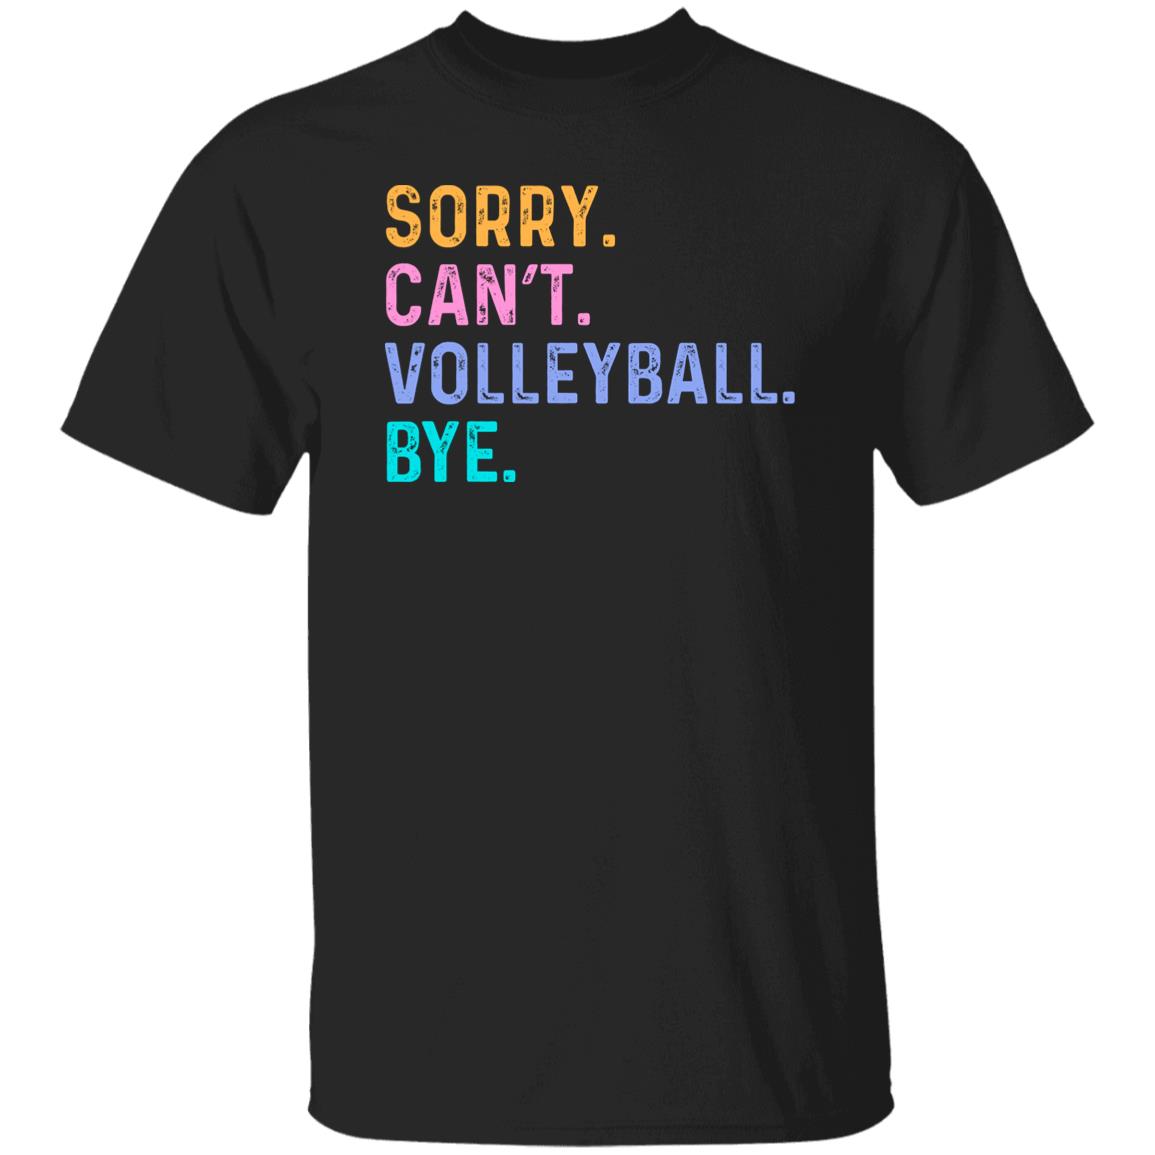 Volleyball fan Unisex t-shirt Sorry Can't Volleyball Bye tee black dark heather-Family-Gift-Planet